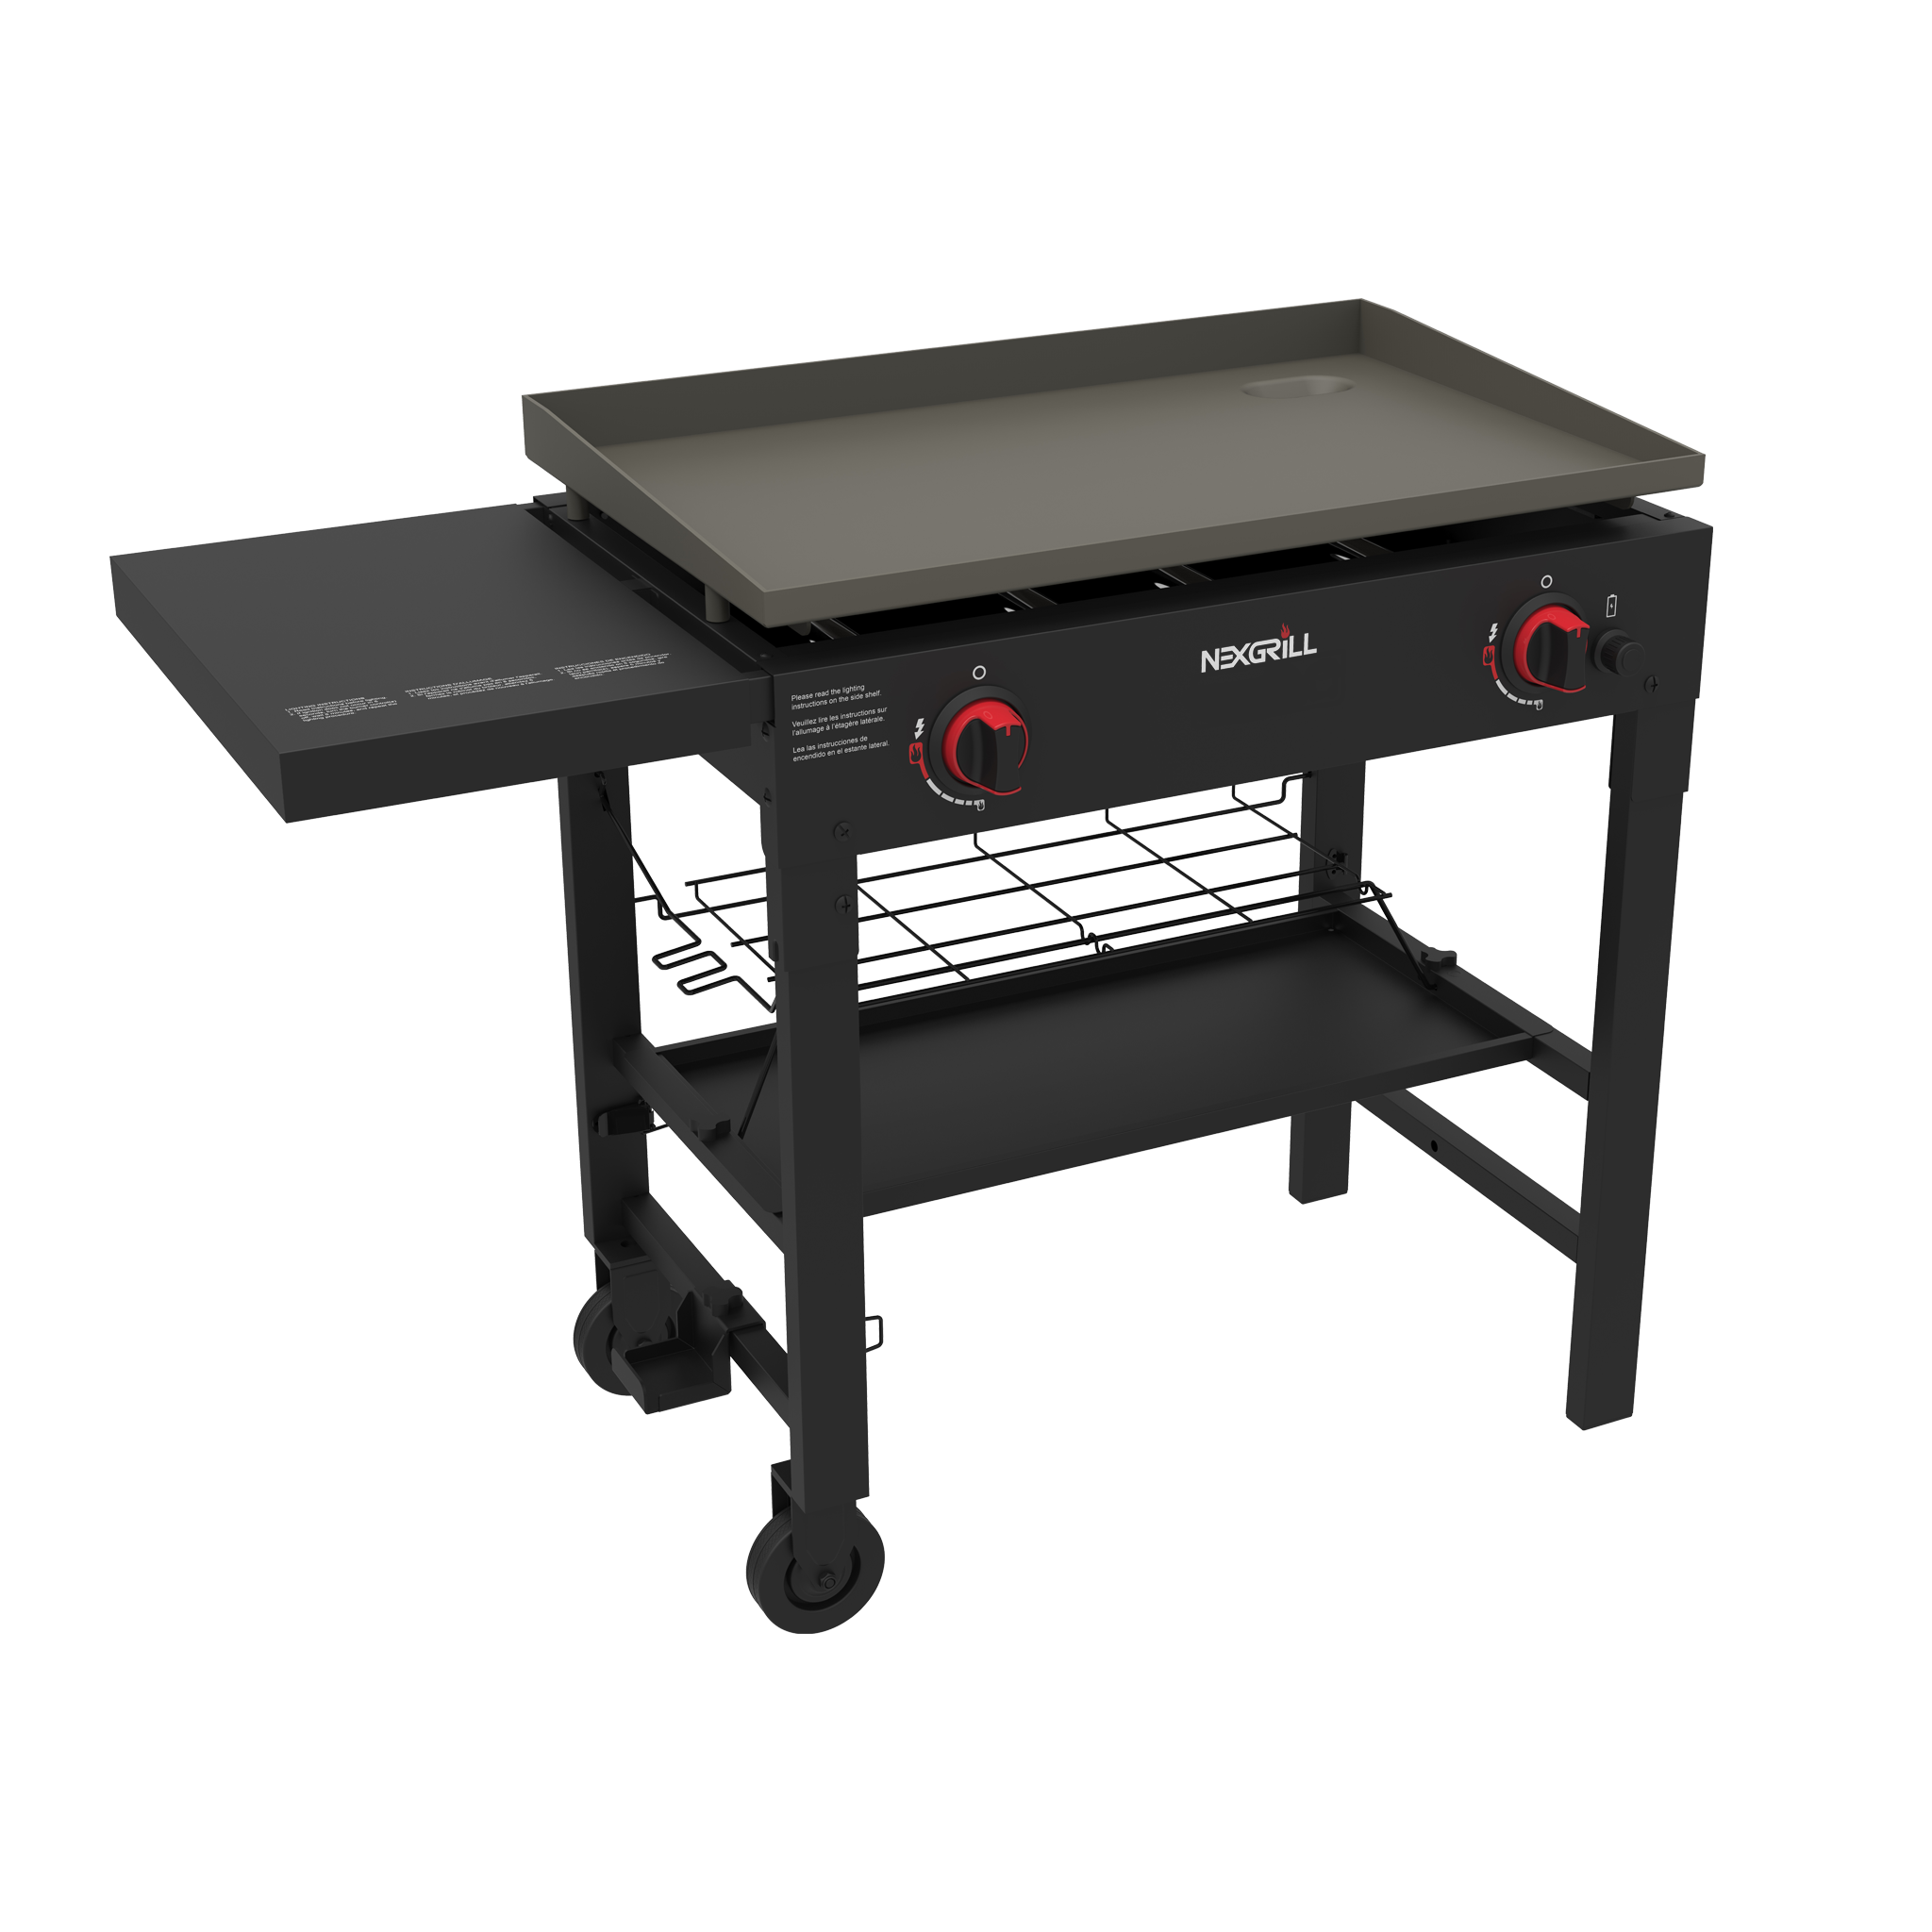 MFSTUDIO Flat-Top Grill, 2-Burner 20,000 BTU Outdoor Propane Griddle Grill  with Cast Iron Griddles Plate, Stainless Steel Cooking Rack and Lid, Black